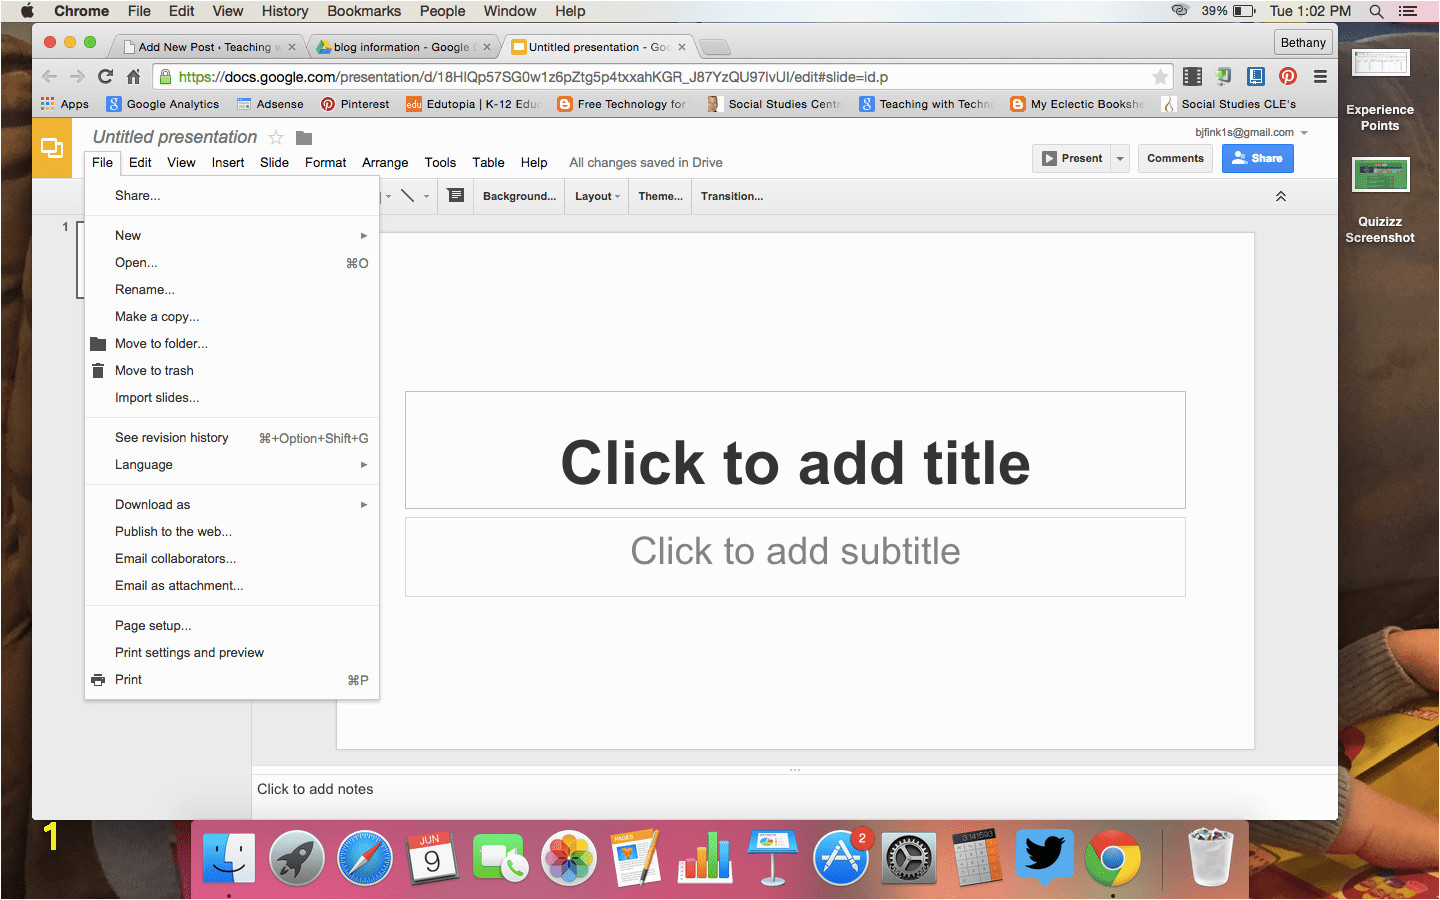 Page Color Google Docs How to Add Backgrounds In Google Docs A Workaround